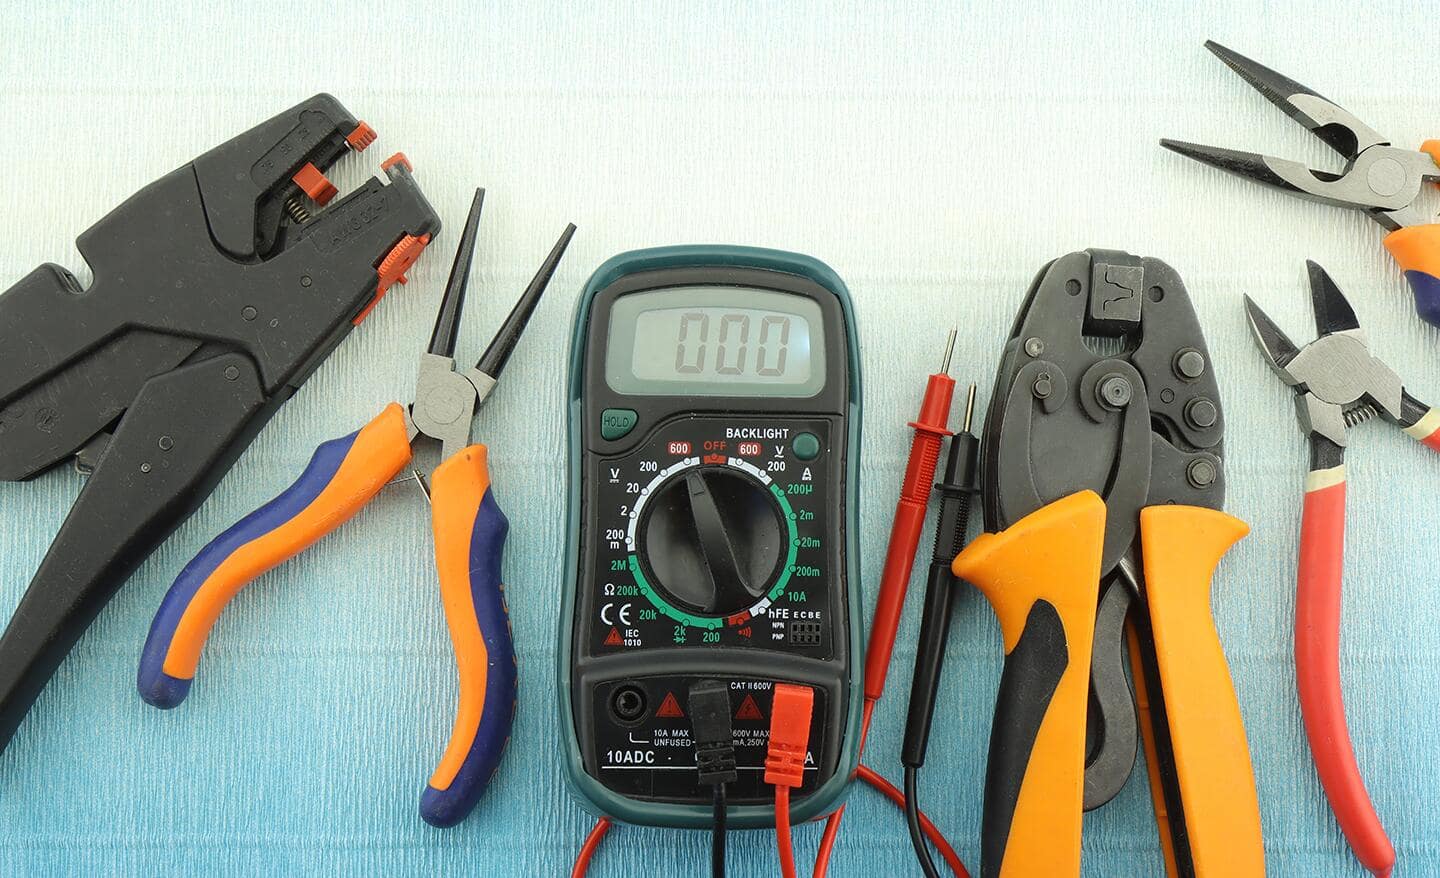 A voltage meter, pliers and other tools gathered on a table.